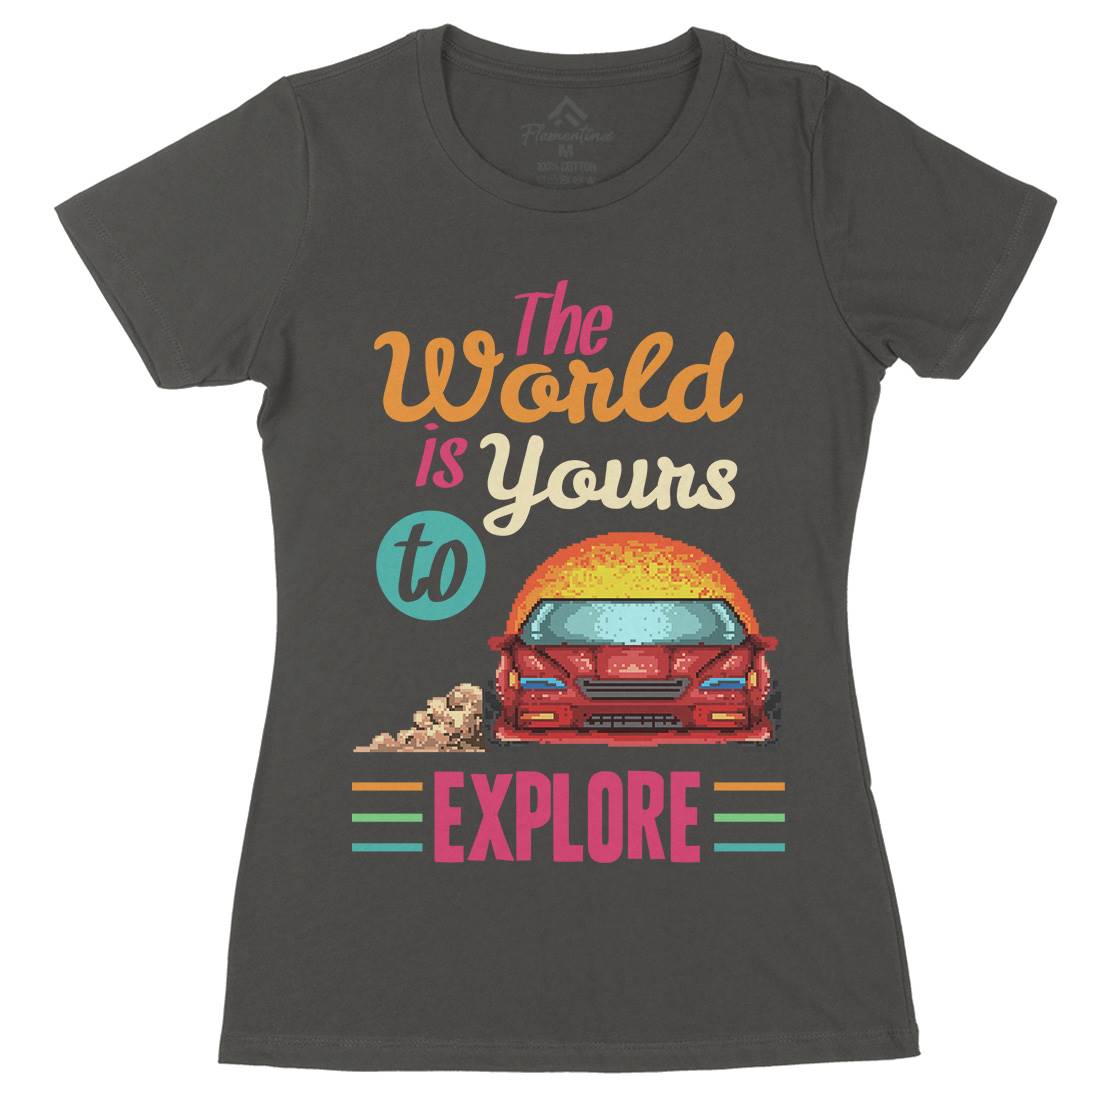 The World Is Yours To Explore Womens Organic Crew Neck T-Shirt Cars B970